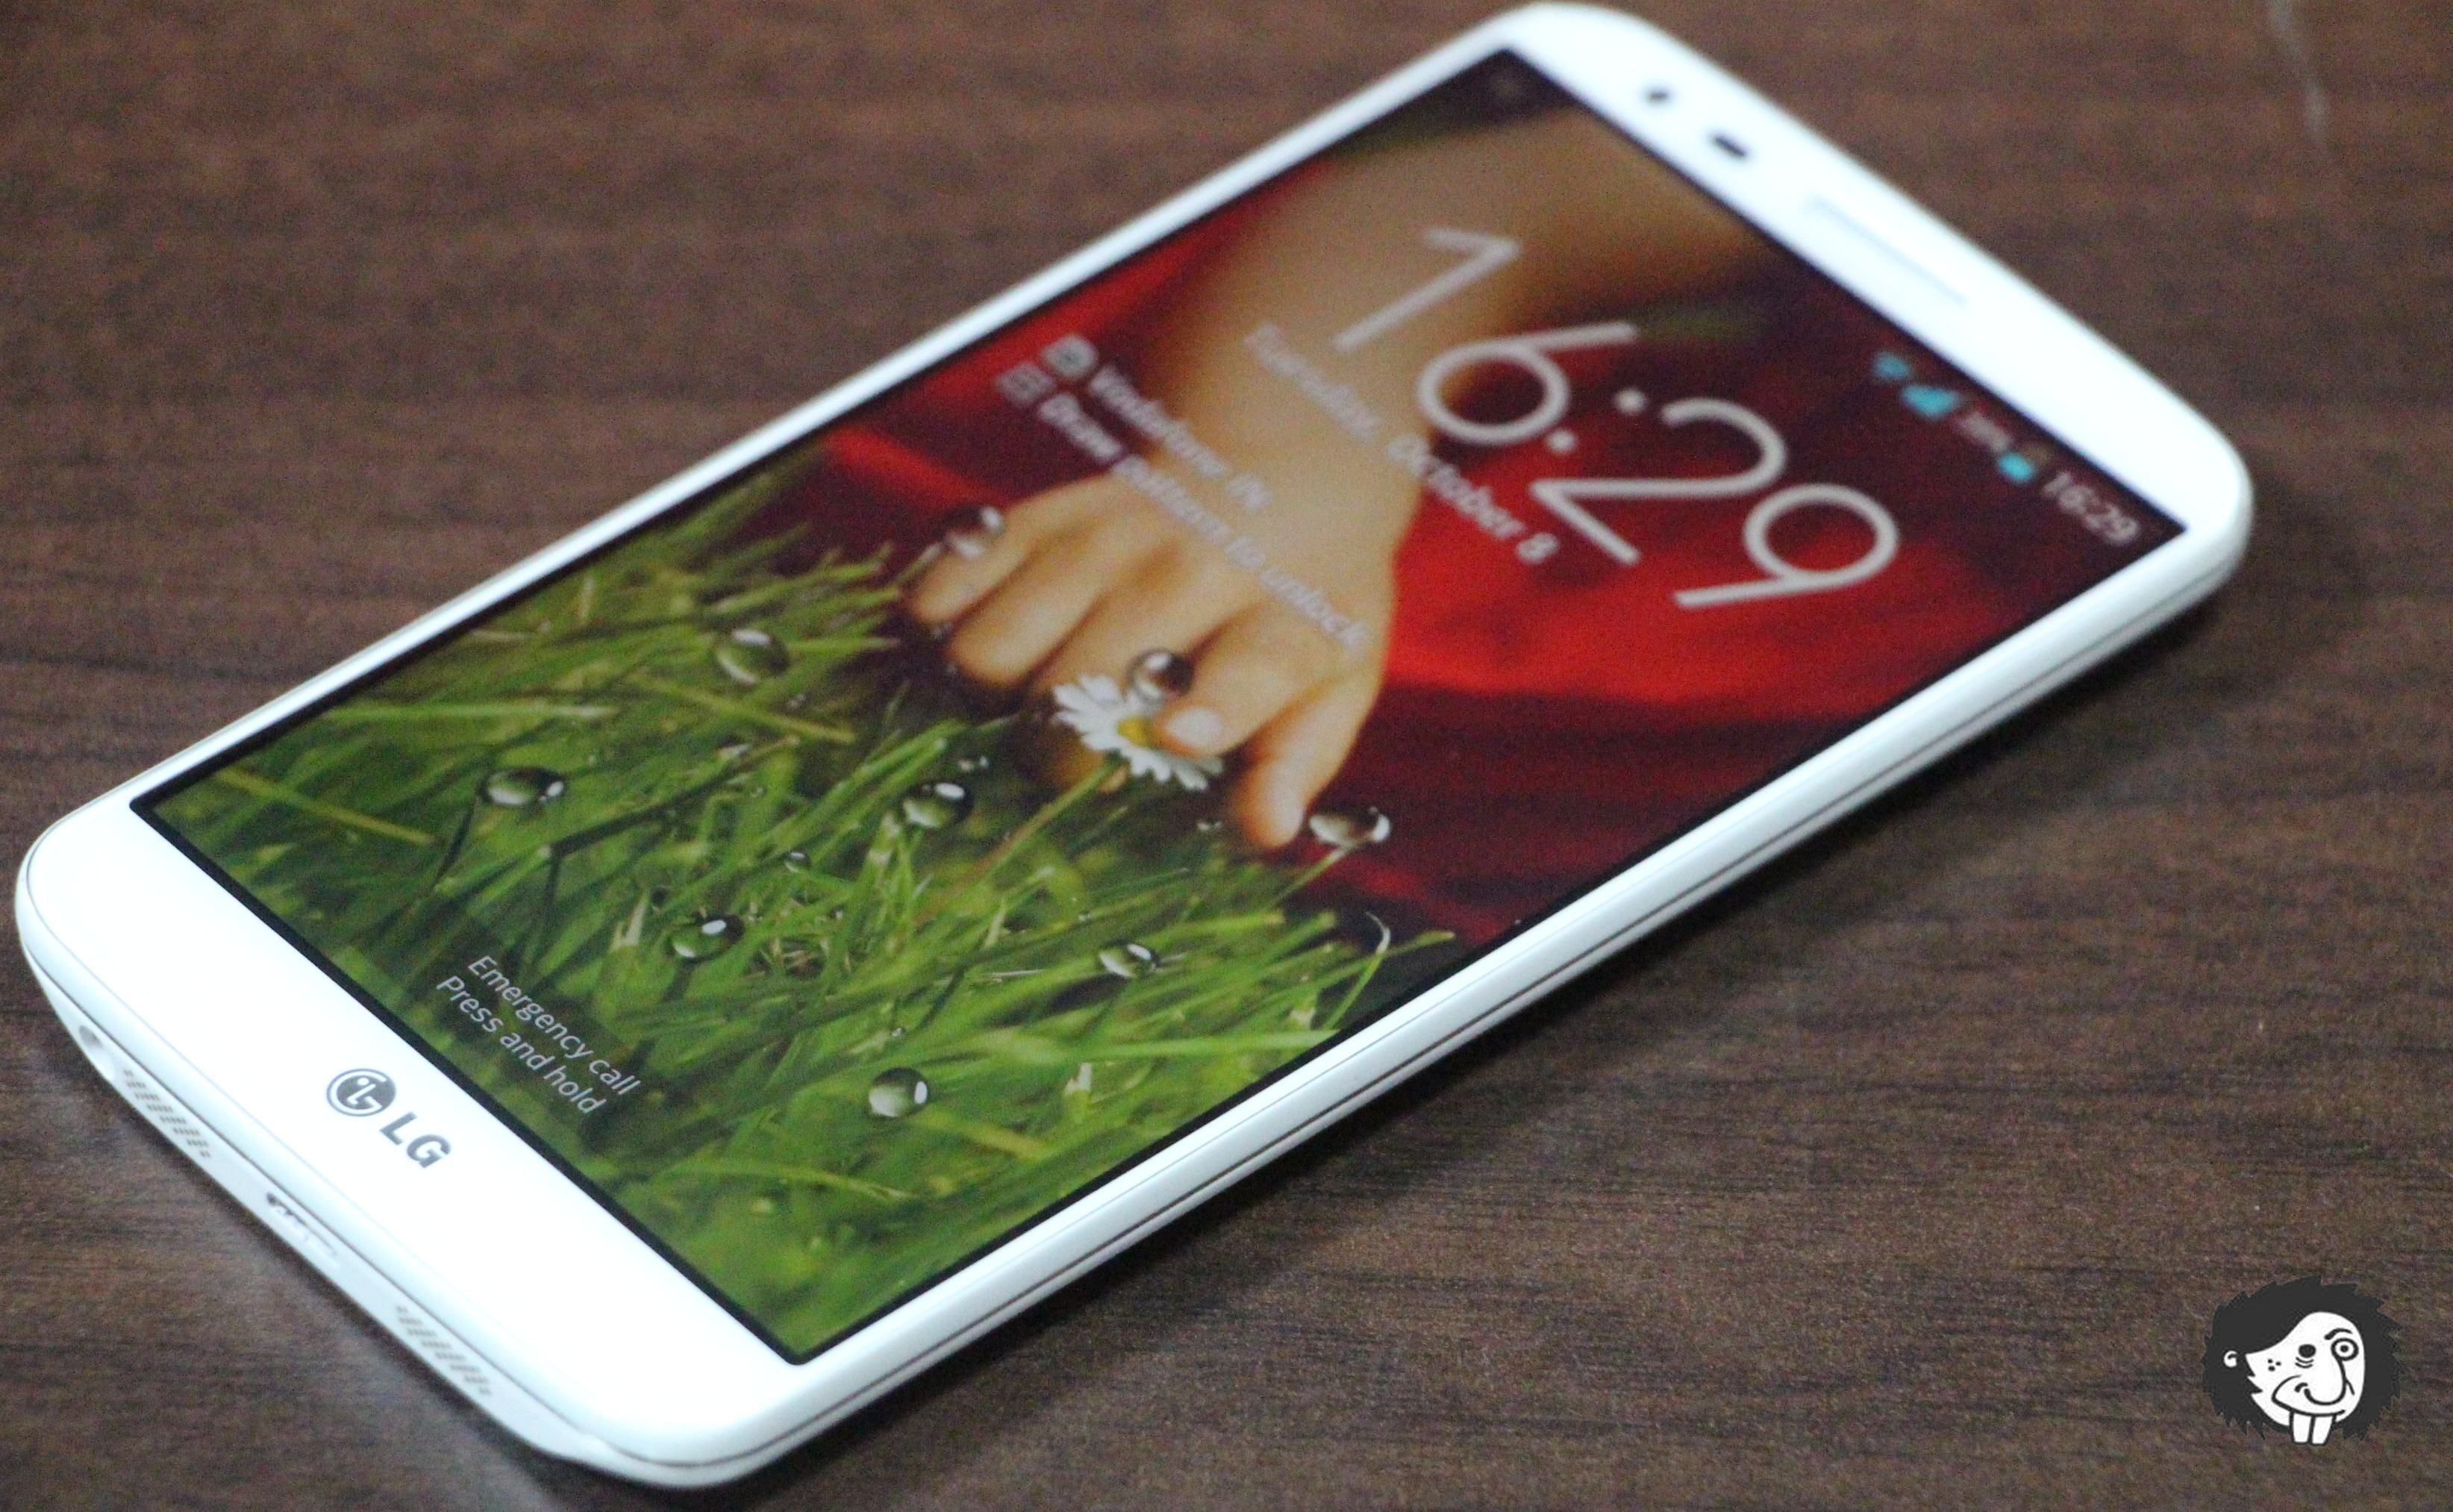 White Lg G2 Wallpaper And Image Pictures Photos